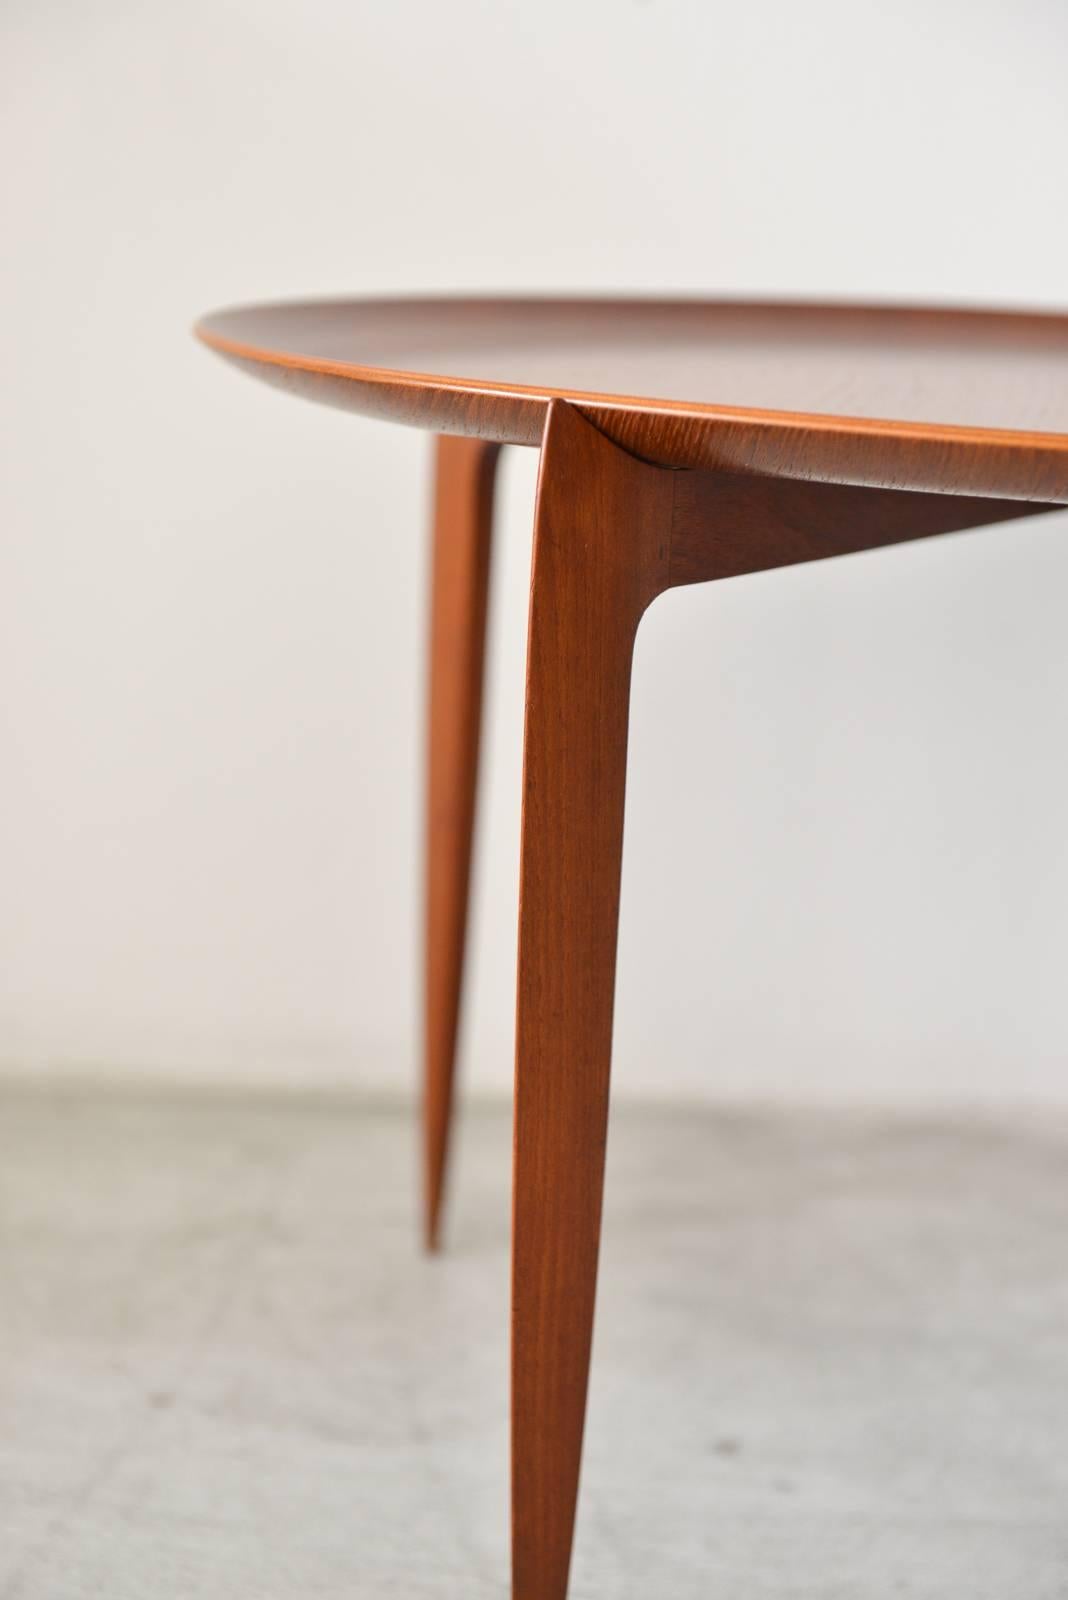 Teak tray table by H Engholm and Svend Aage Willumsen for Fritz Hansen. Beautifully restored in showroom condition. Tray is removable from the base. 

Measures: 23.5" diameter, 17" height.